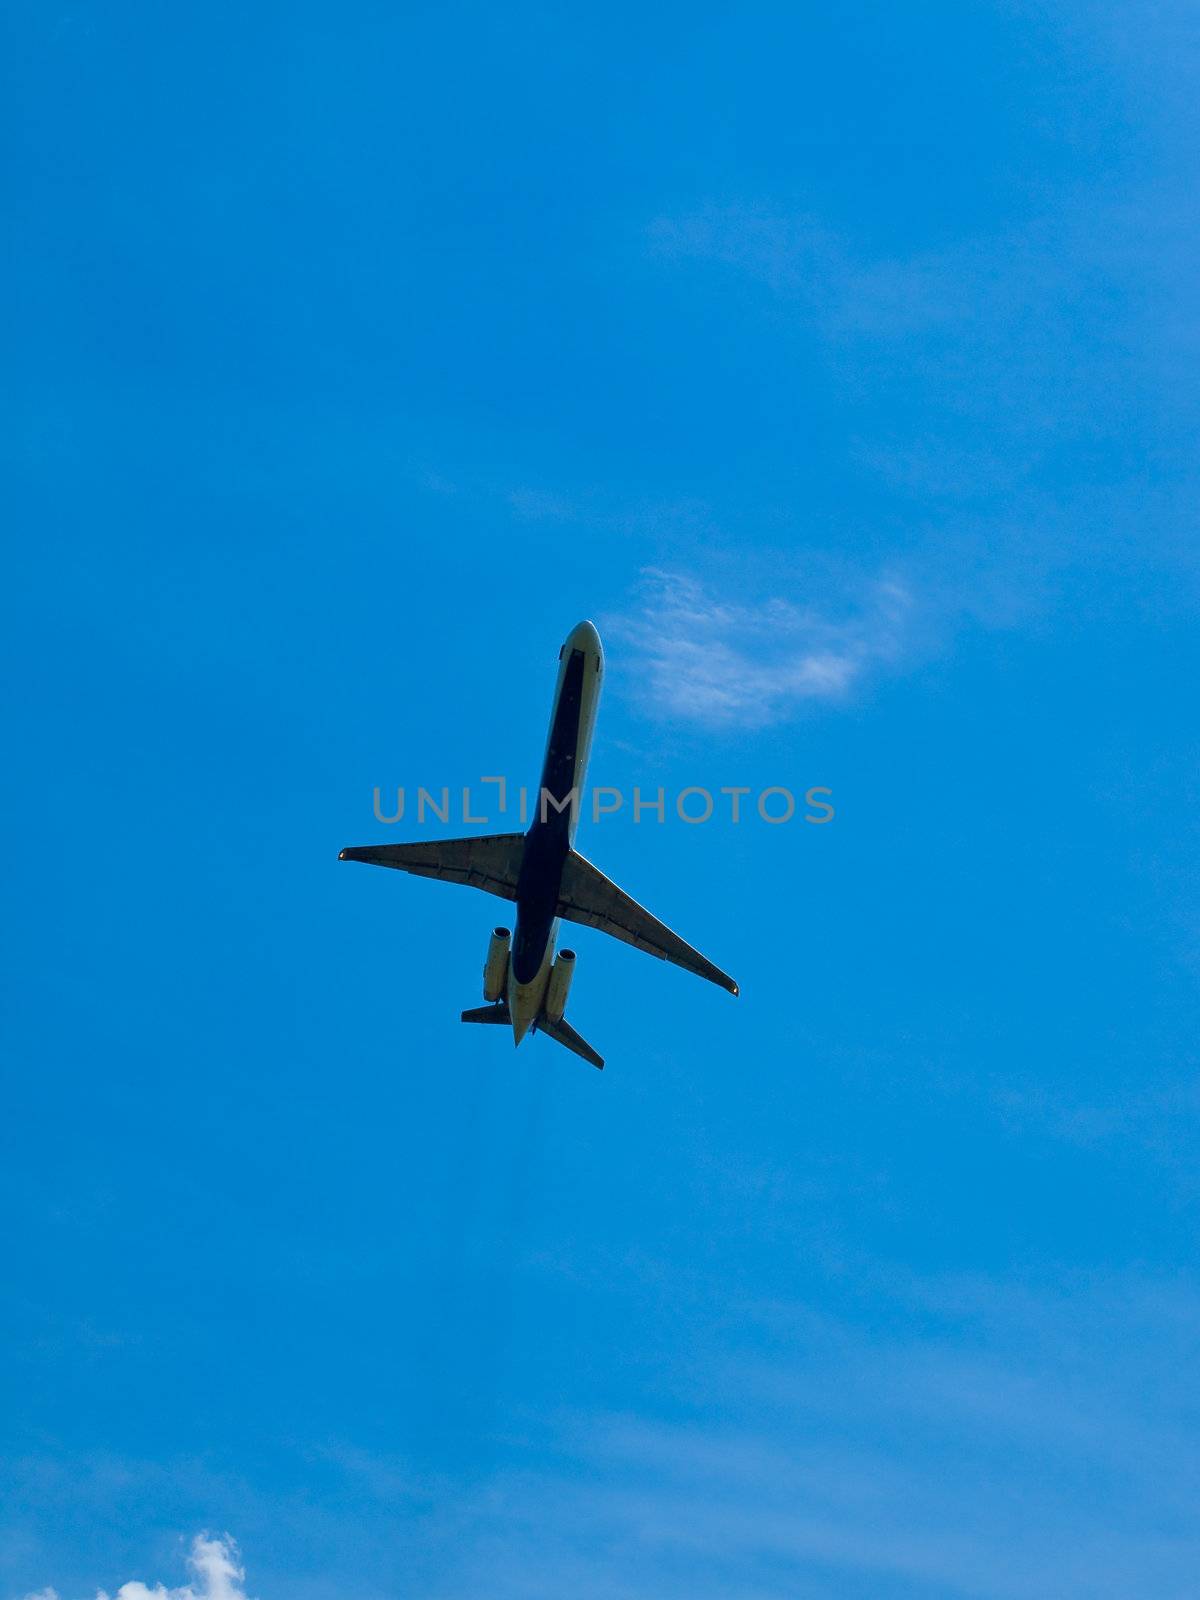 A Commercial Airliner Taking Off into a Partly Cloudy Blue Sky by Frankljunior